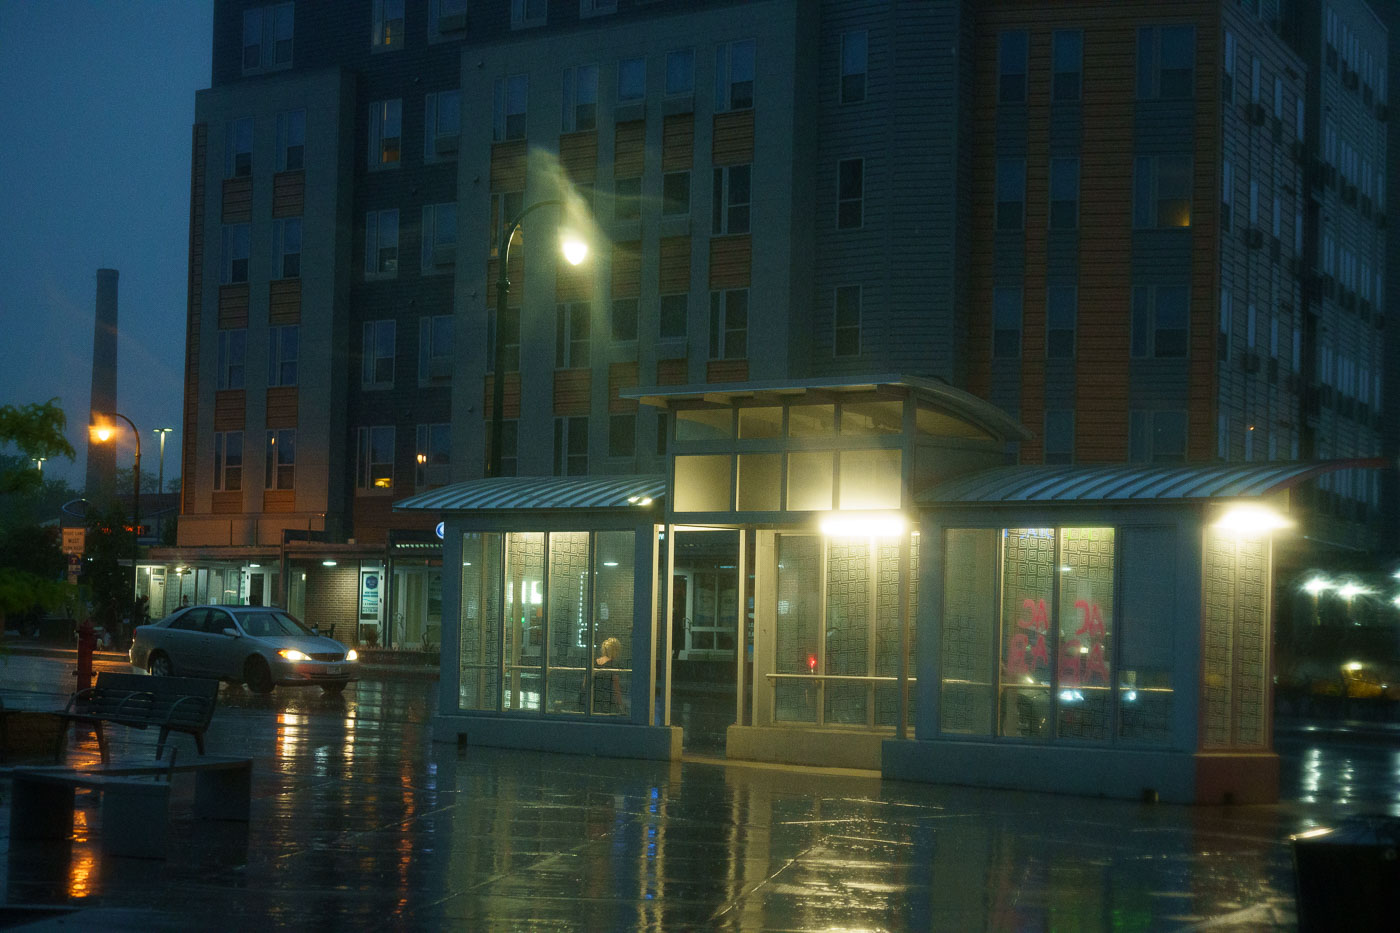 Bus shelter on a rainy night in Minneapolis